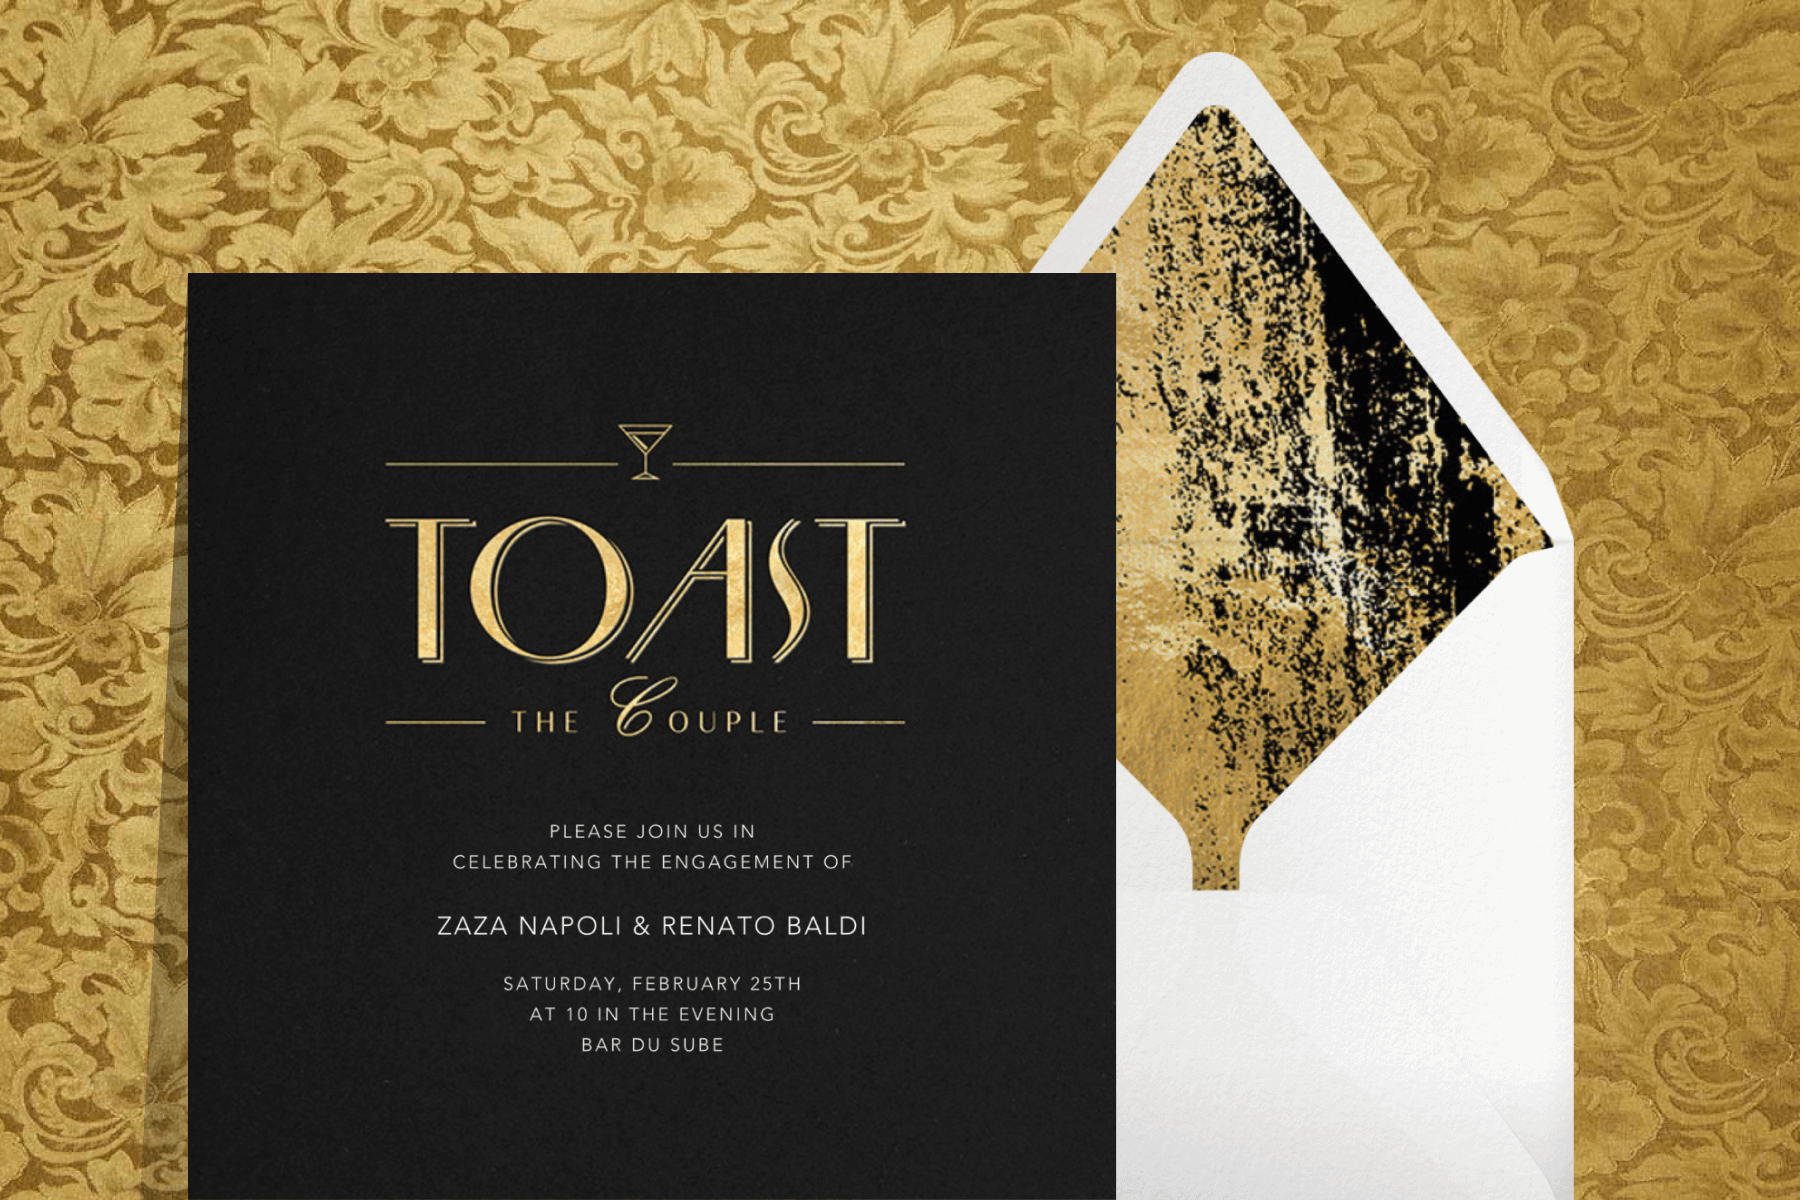 A black engagement party invitation with gold lettering that reads “Toast the couple” and a small gold martini glass beside a white envelope with a shiny gold liner.